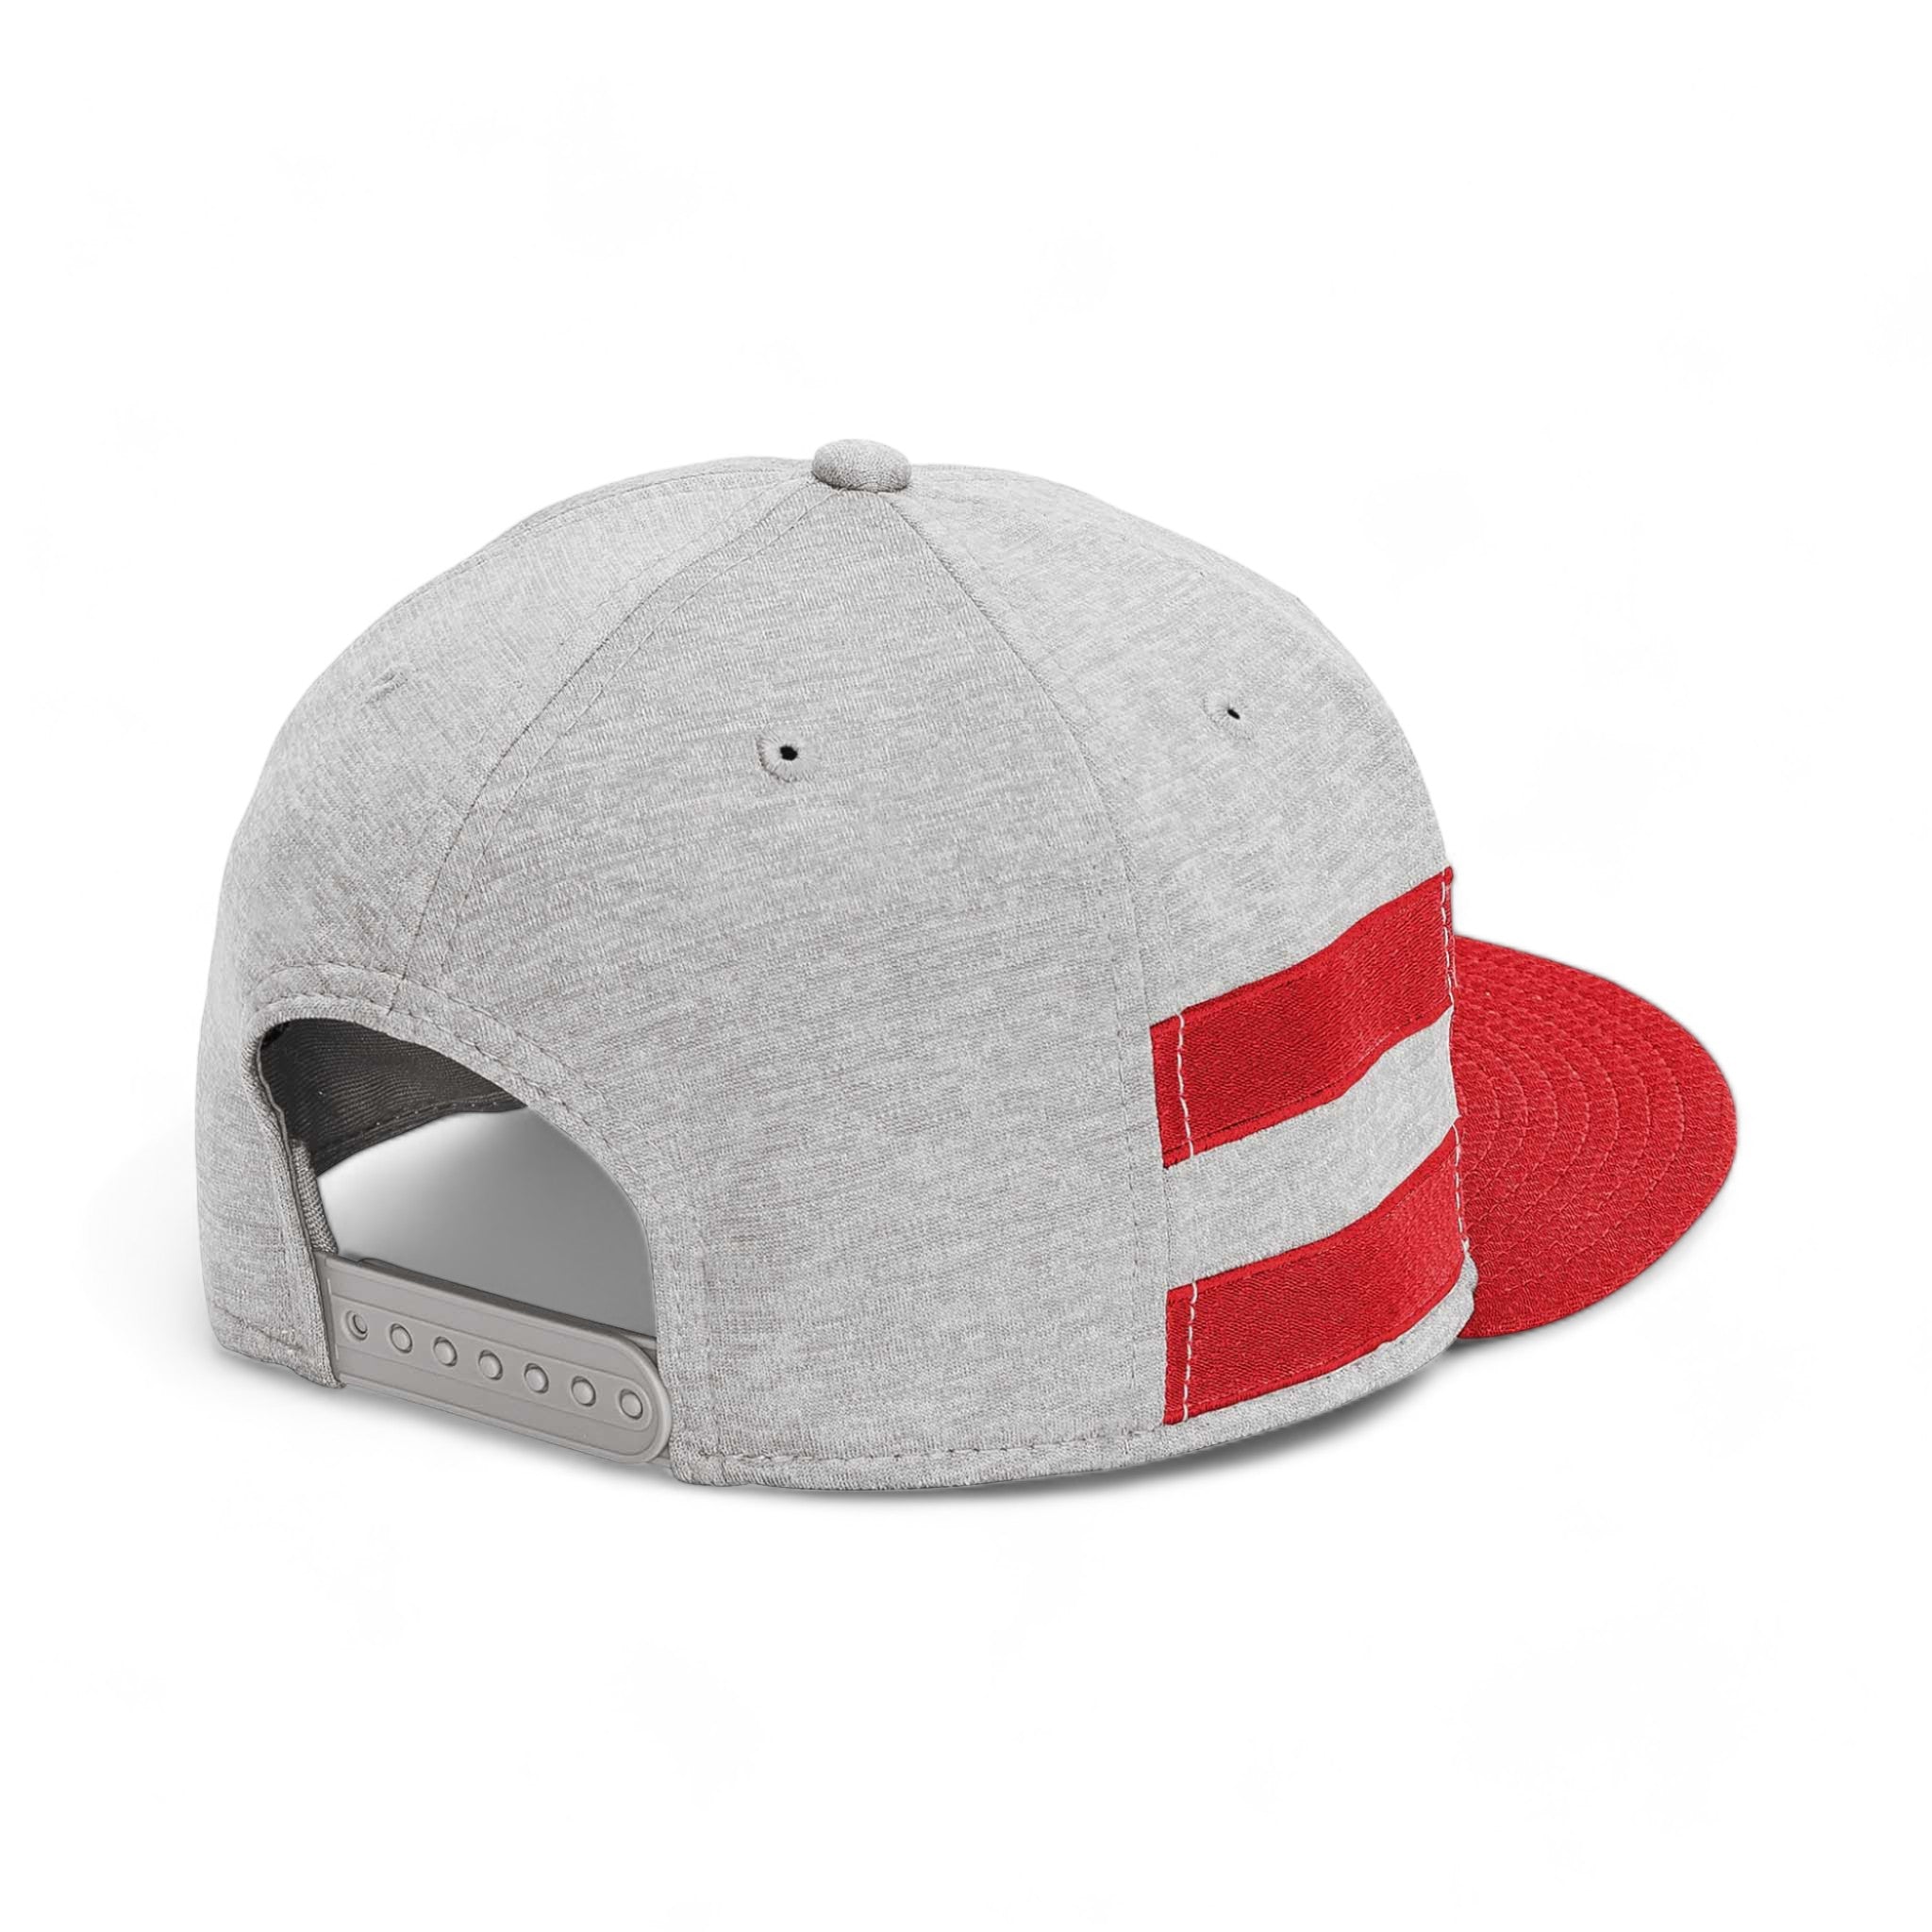 Back view of New Era NE408 custom hat in shadow heather and scarlet